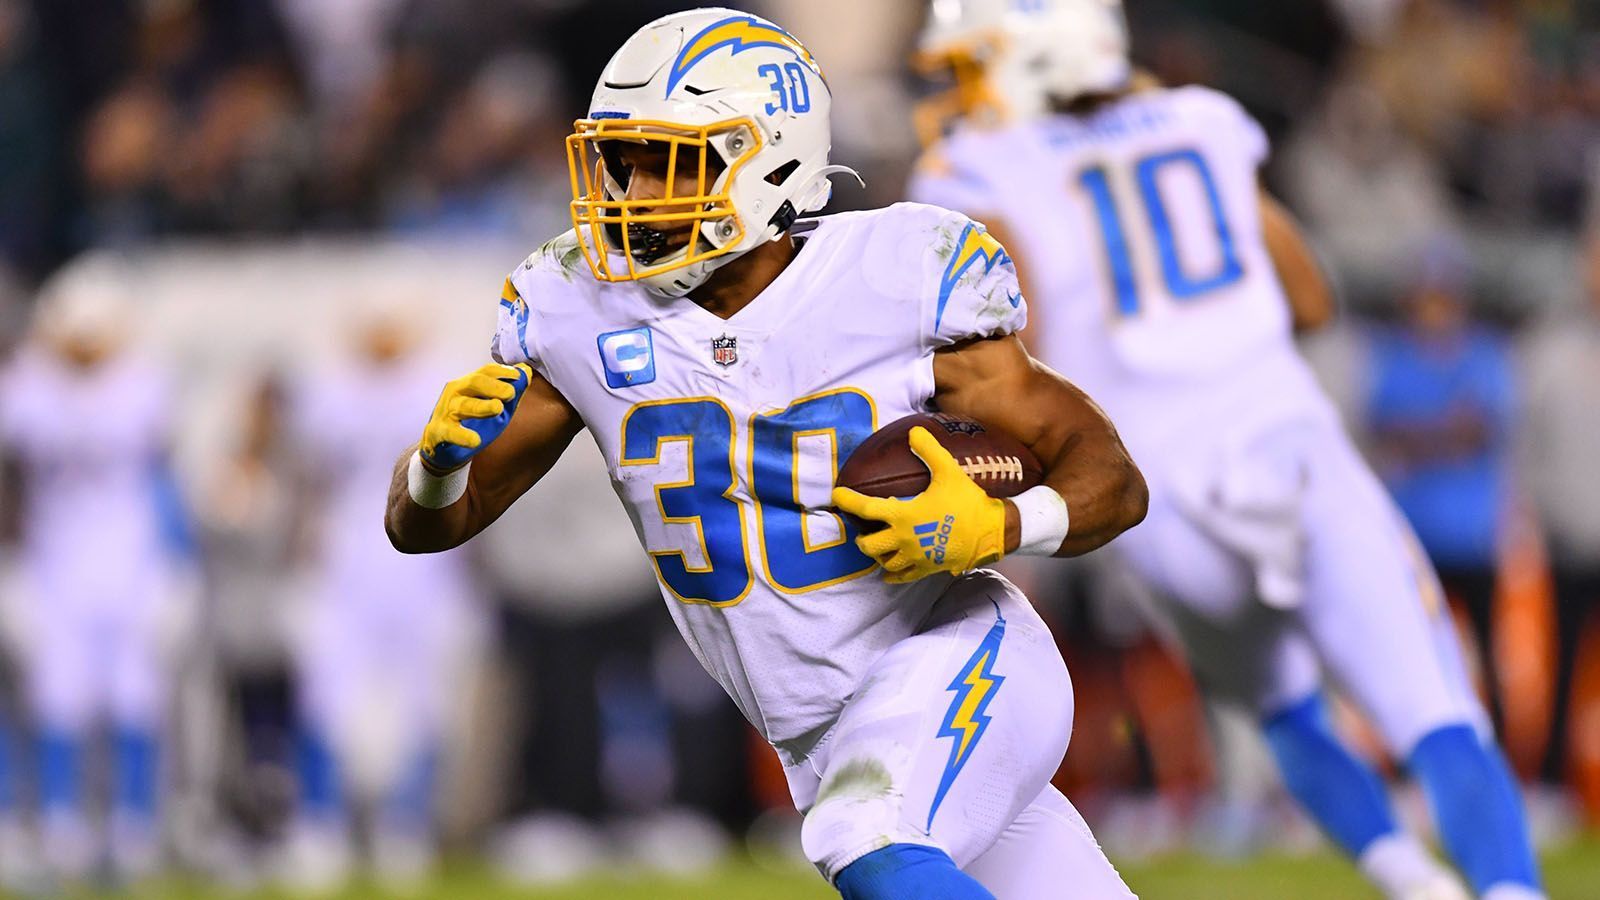 
                <strong>9. Platz (geteilt): Austin Ekeler</strong><br>
                &#x2022; Team: Los Angeles Chargers<br>&#x2022; Position: Running Back<br>&#x2022; <strong>Overall Rating: 88</strong><br>&#x2022; Key Stats: Speed 91 - Acceleration 92 - Agility 92<br>
              